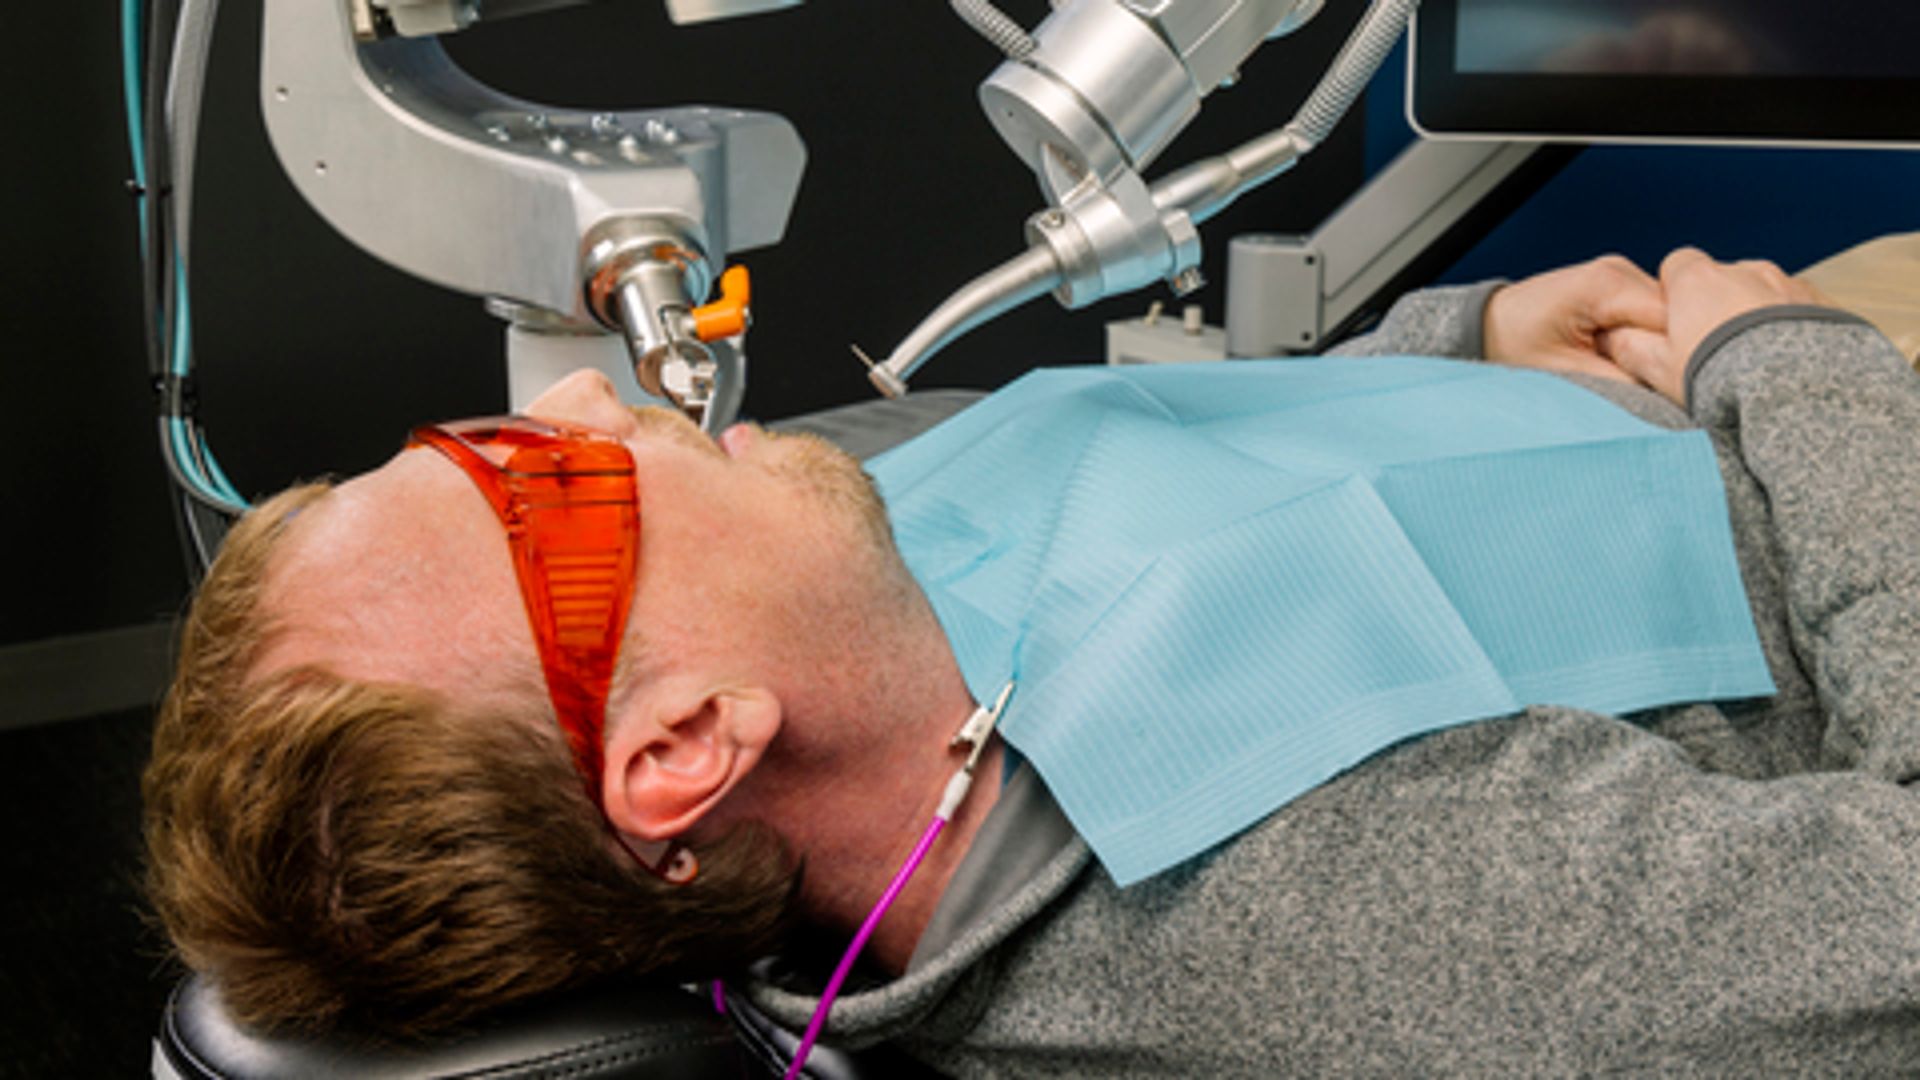 Robot dentist performs world's first fully automated procedure